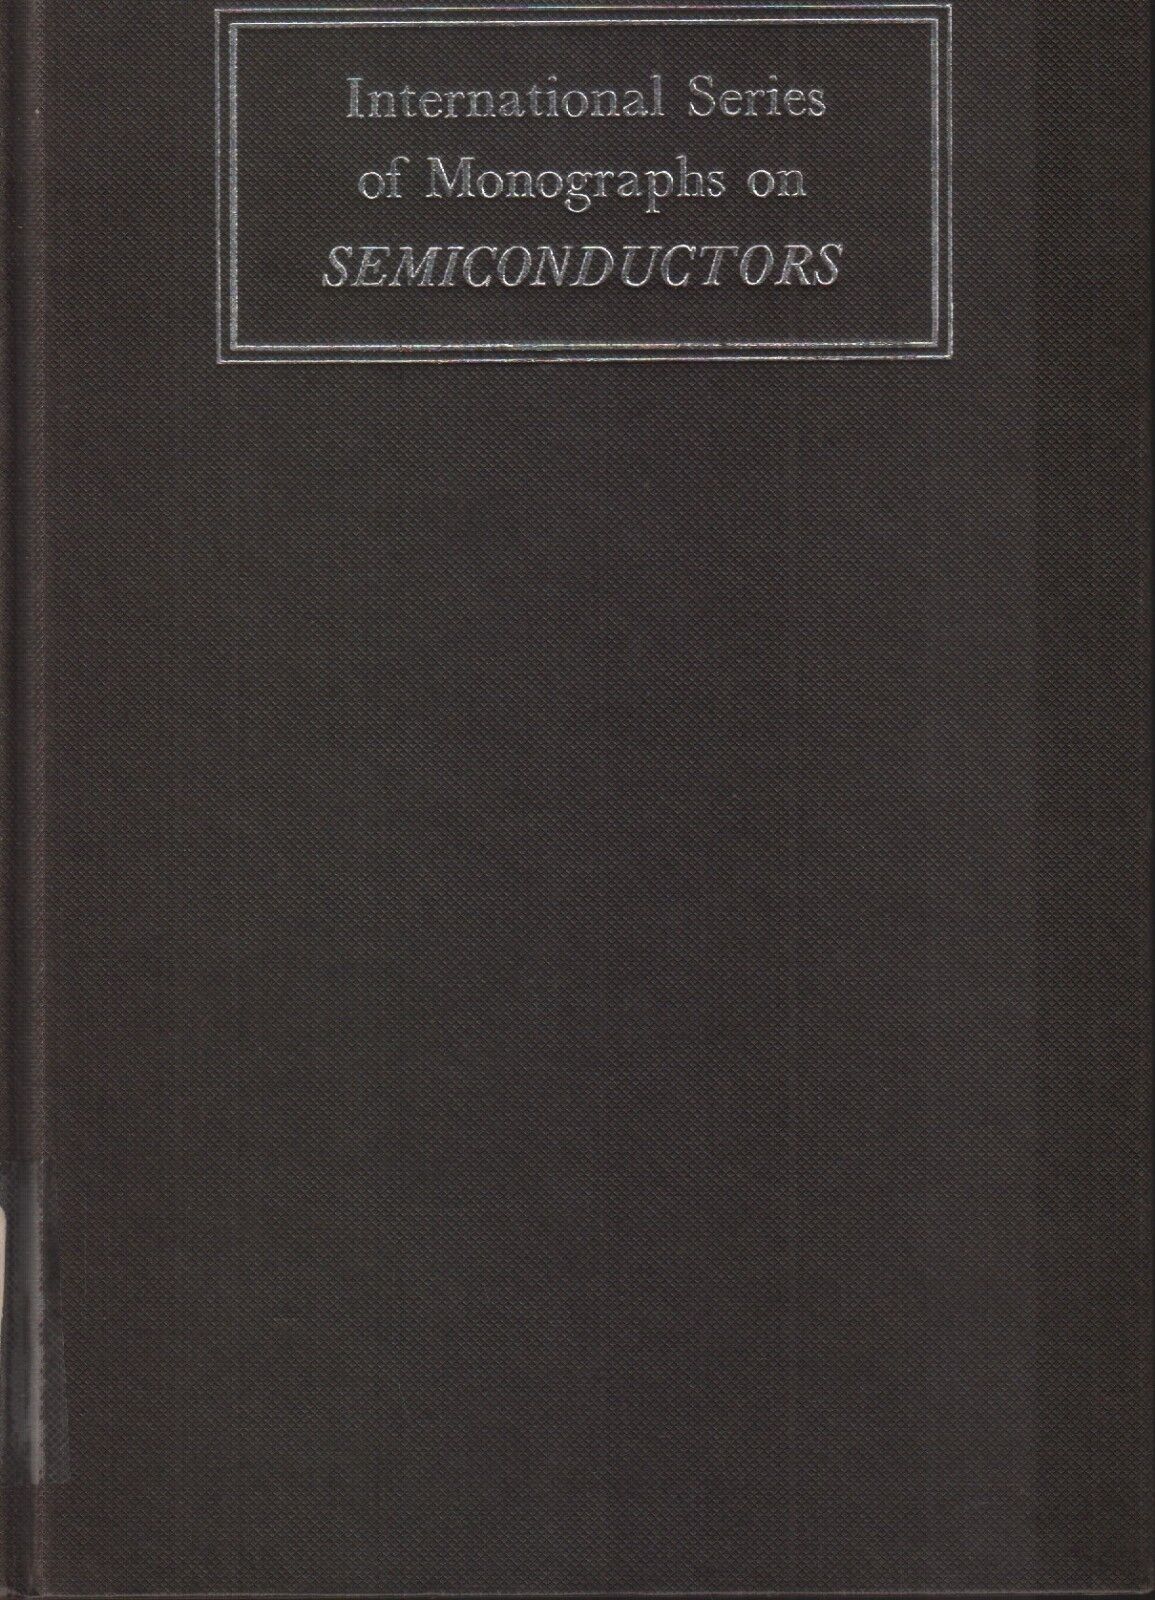 Thermal Conduction in Semiconductors 1961 vol 4 Drabble EX-FAA 102618AME2